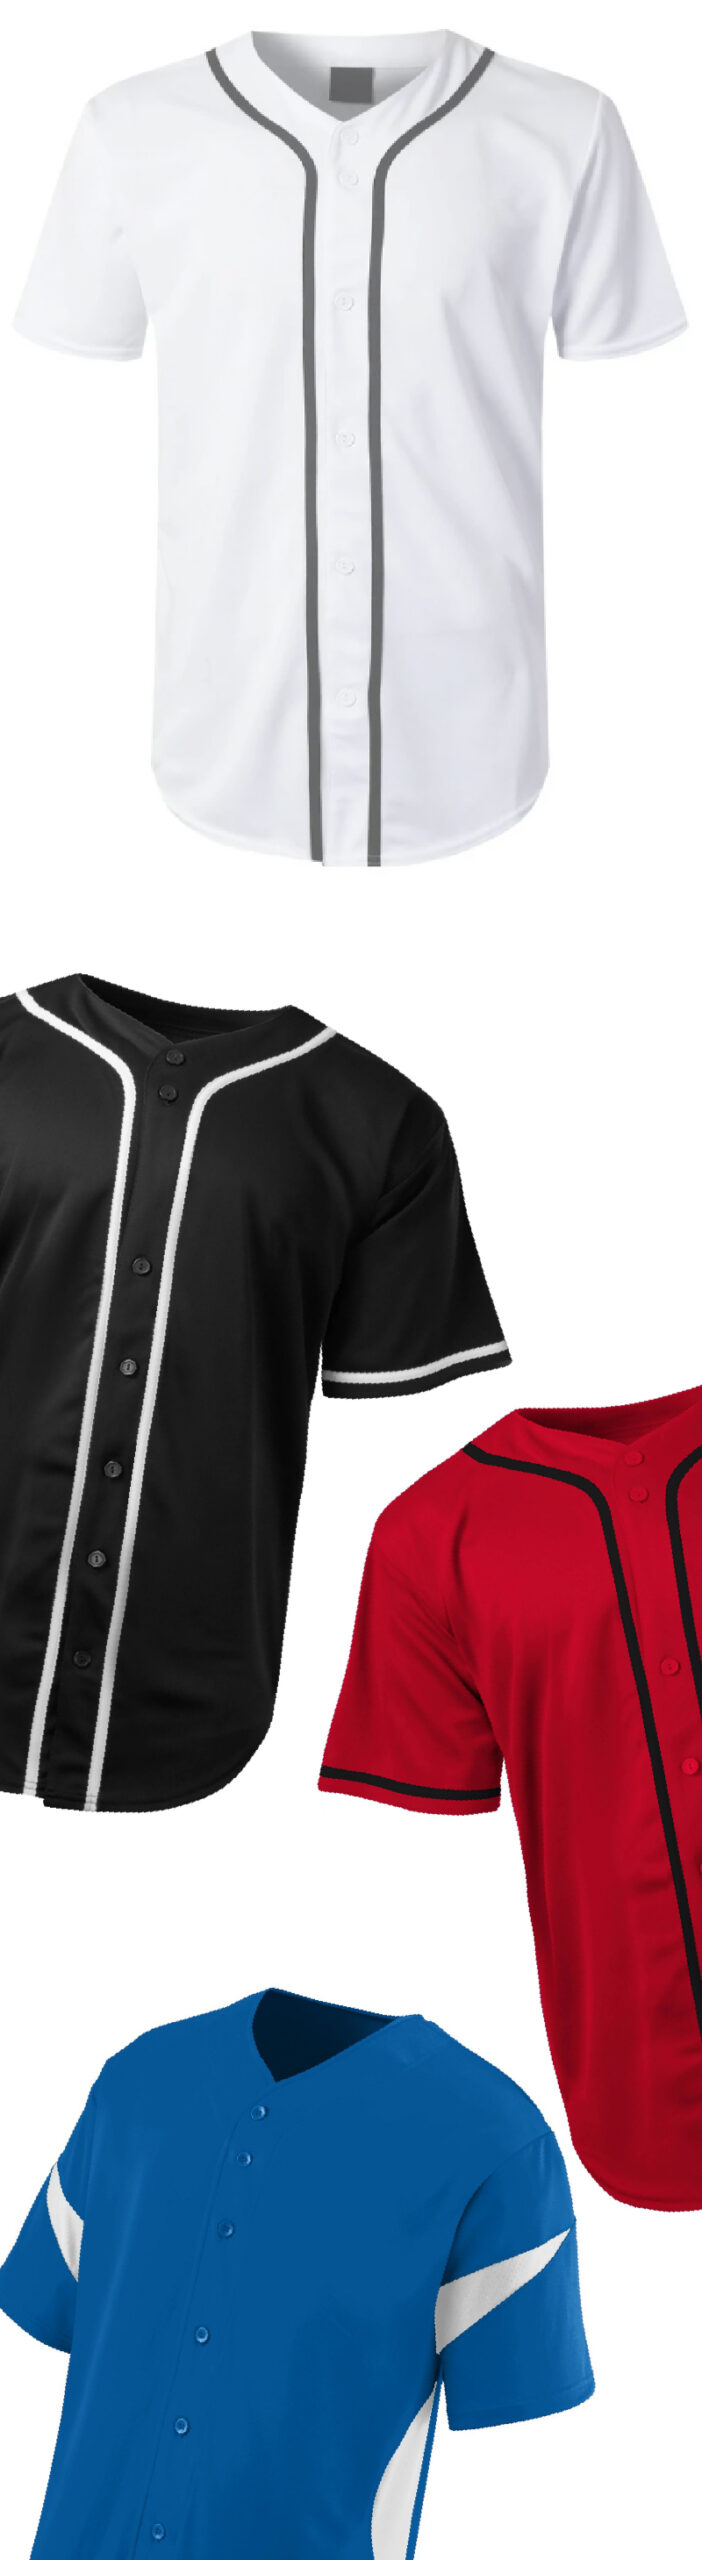 Multiple Jerseys: Show Your Team Spirit in Style